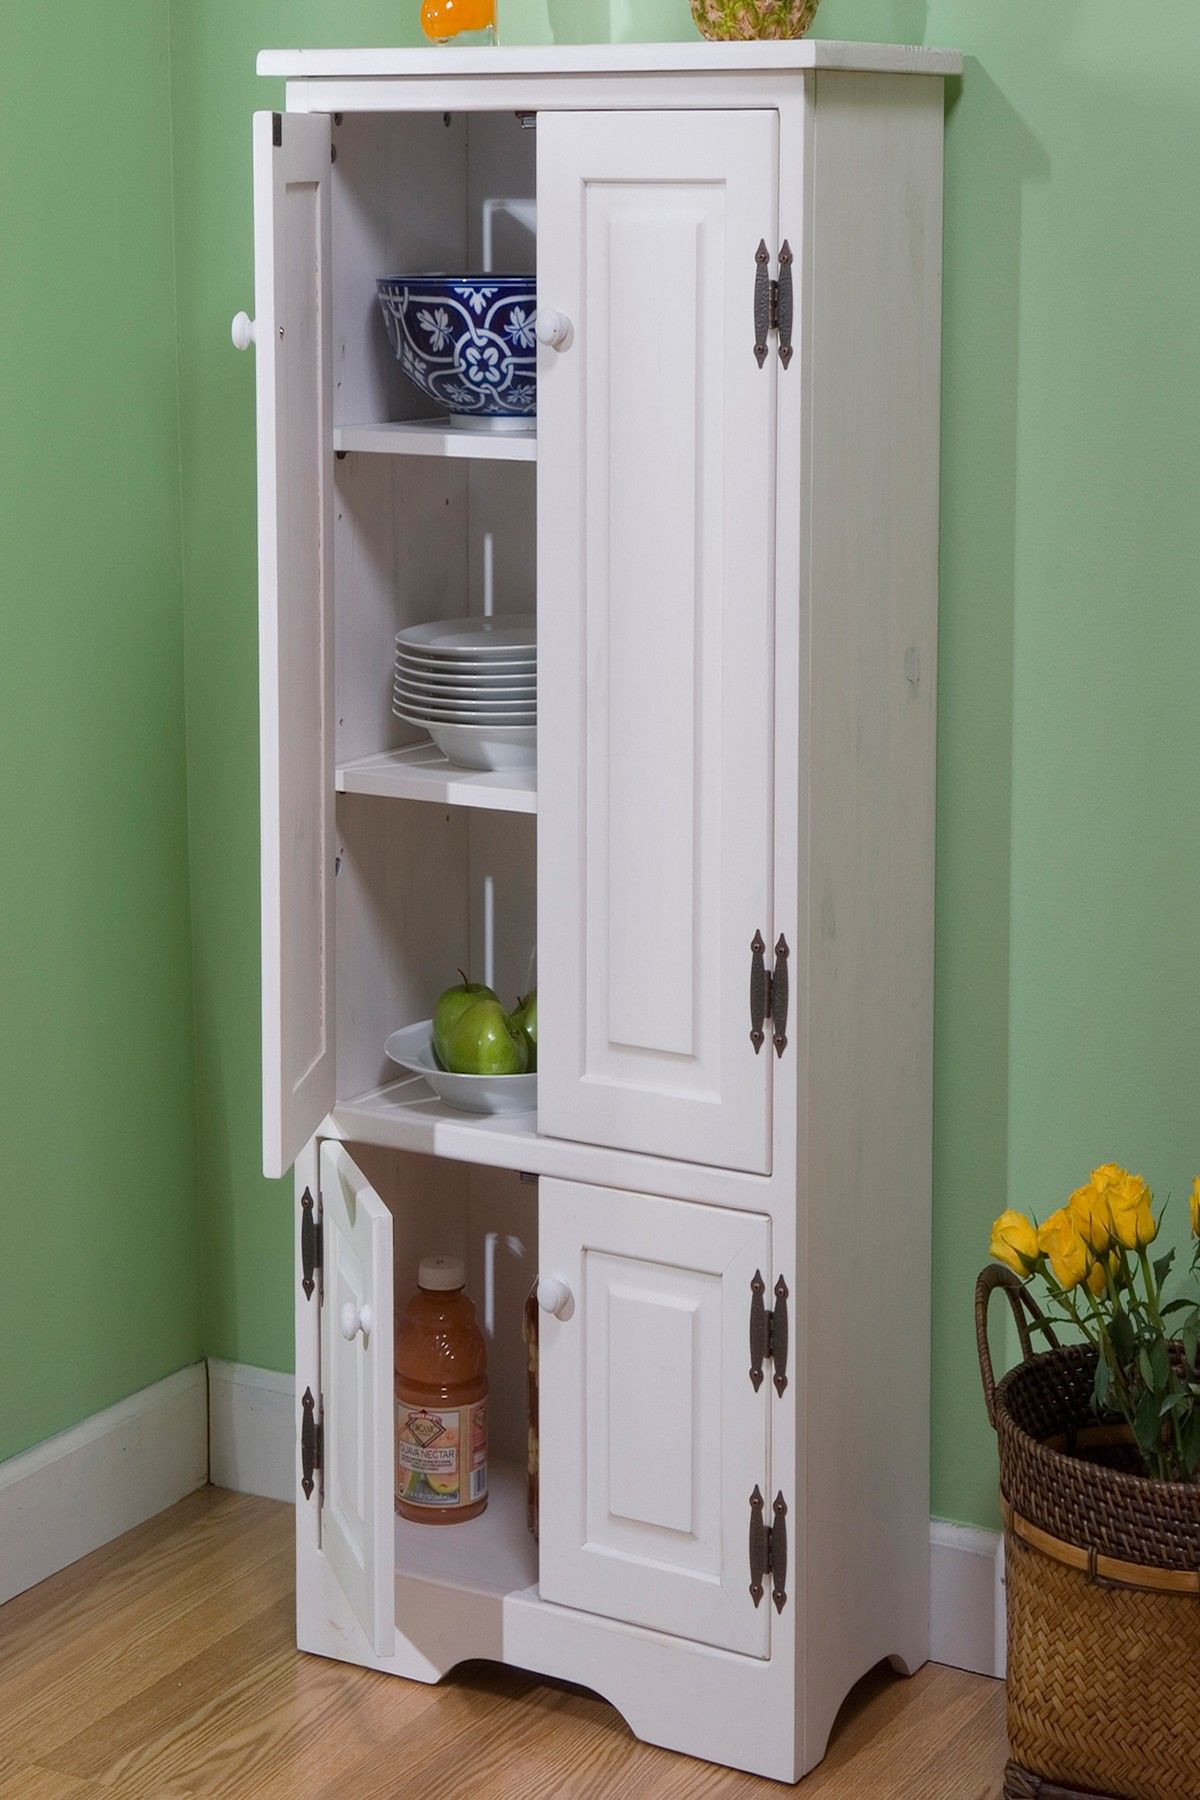 Tall White Kitchen Storage Cabinet
 Extra Tall White Cabinet